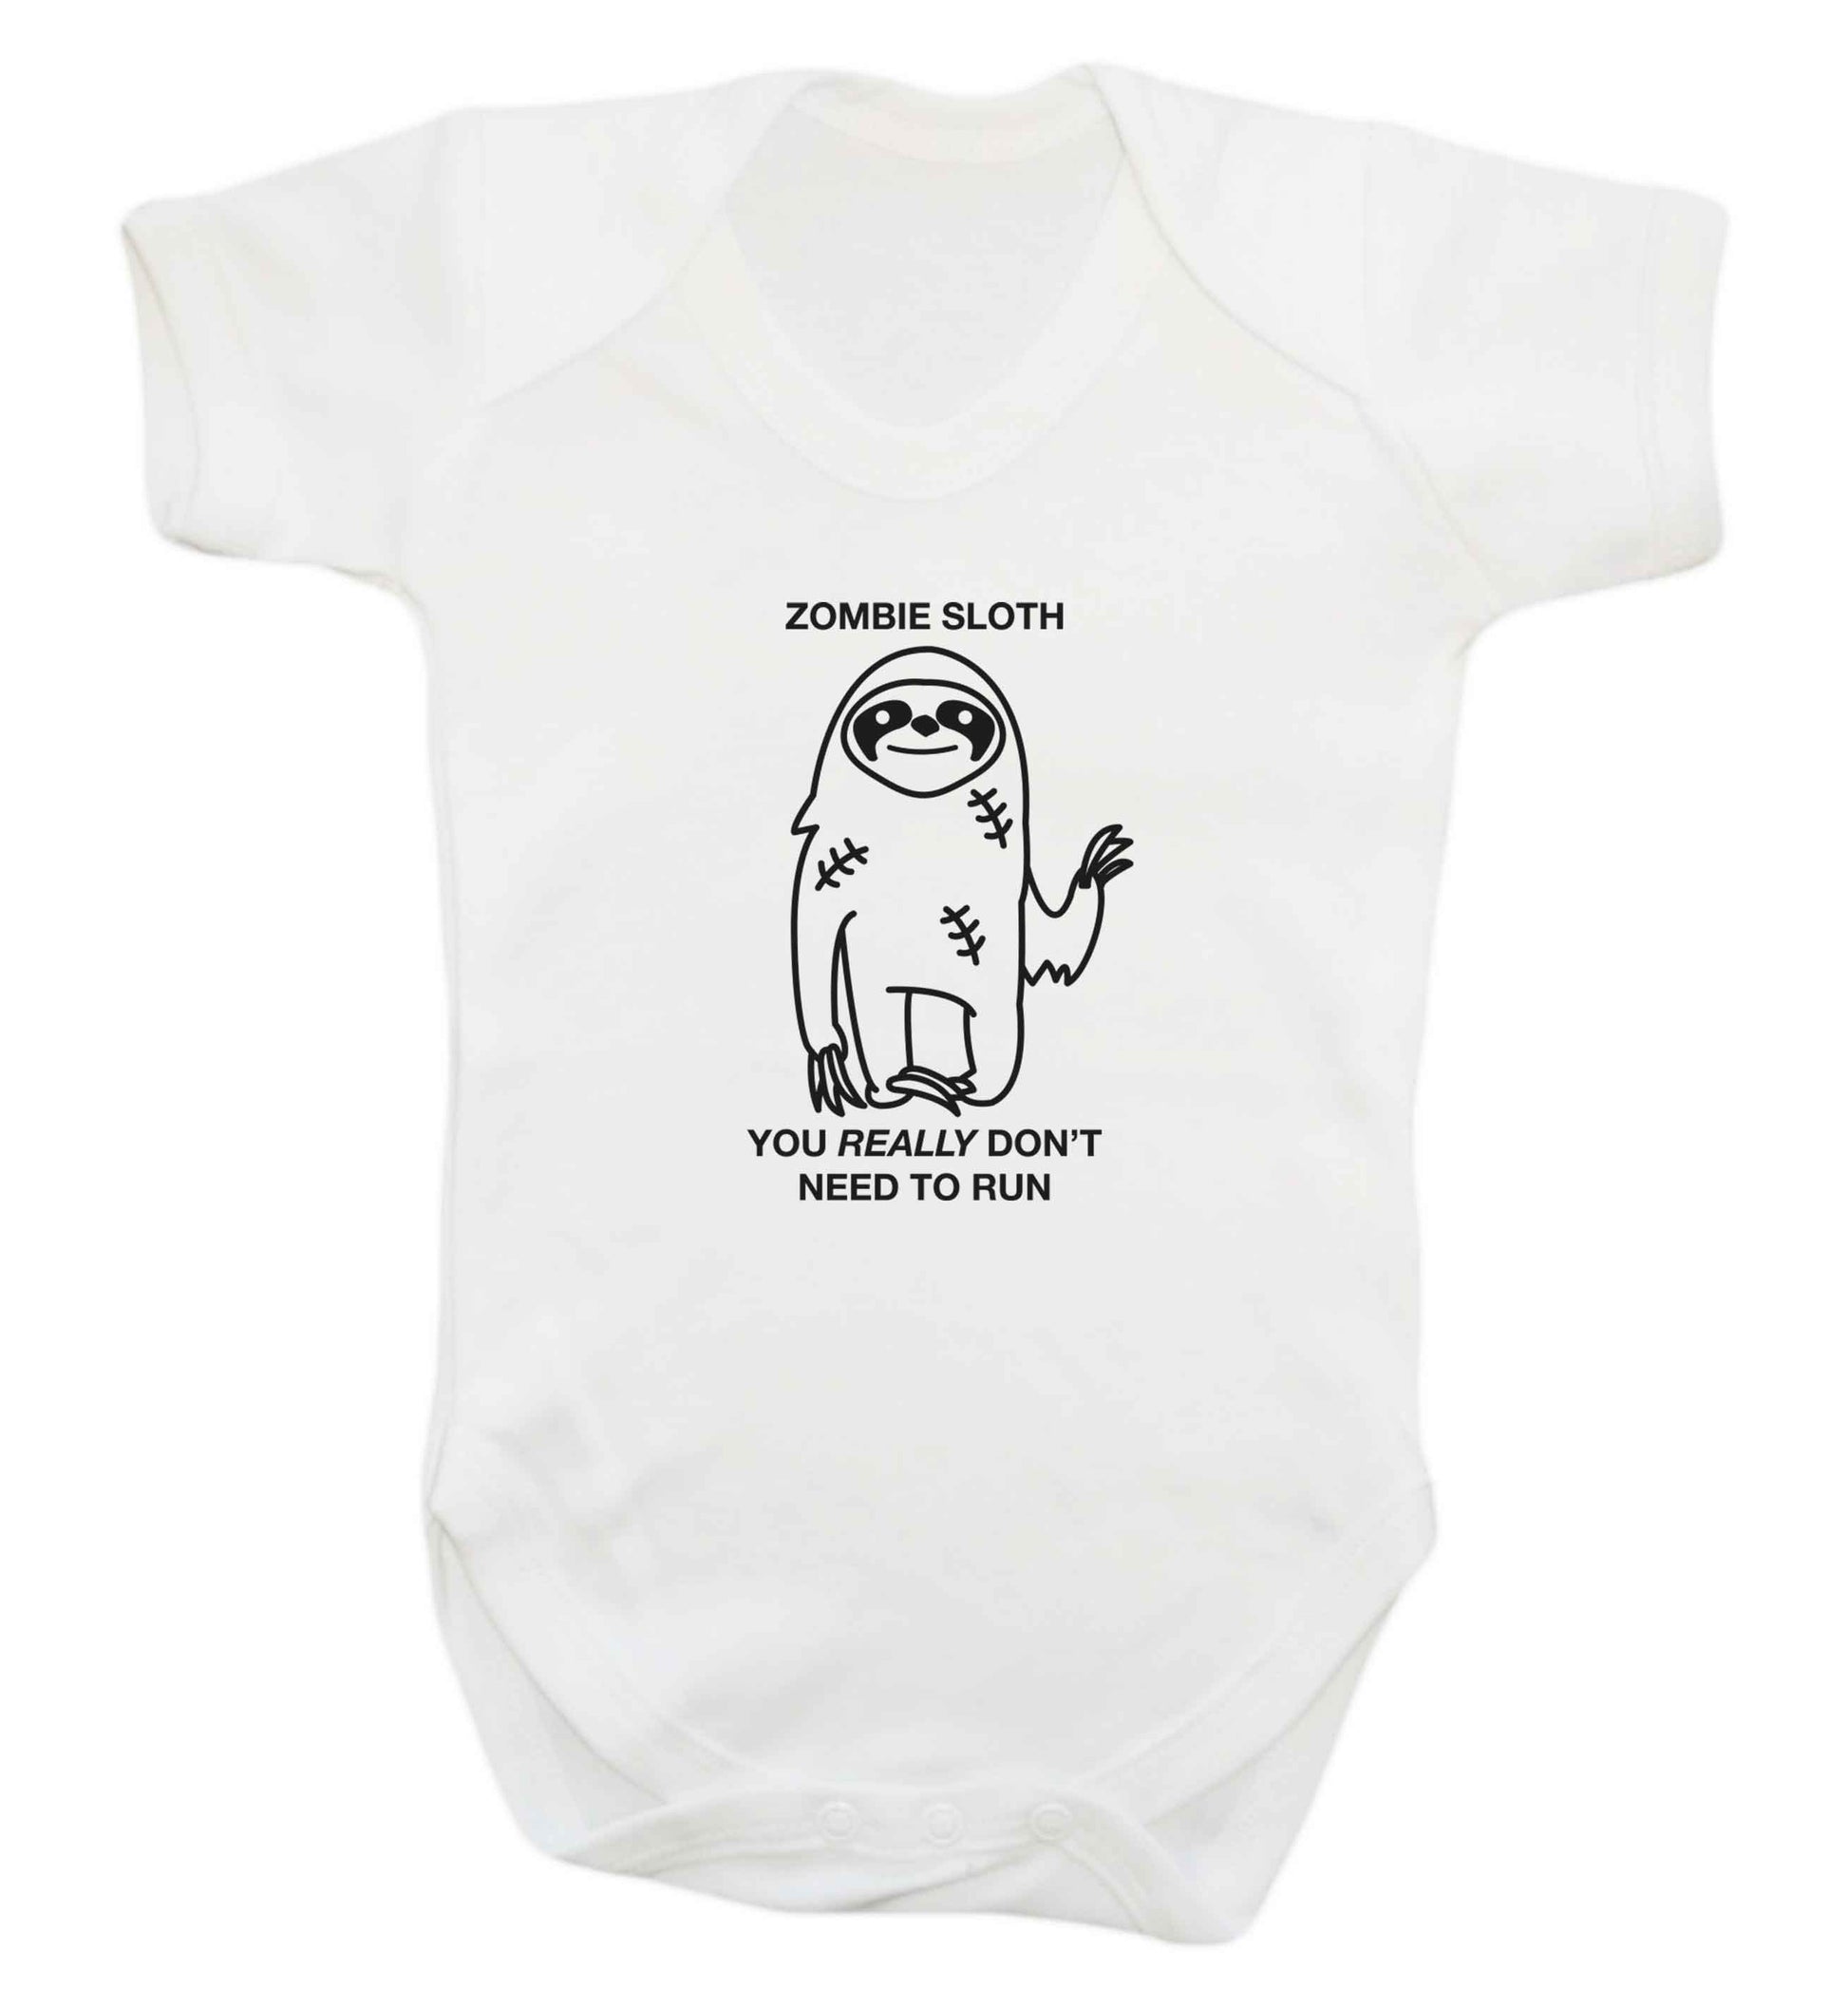 Zombie sloth you really don't need to run baby vest white 18-24 months